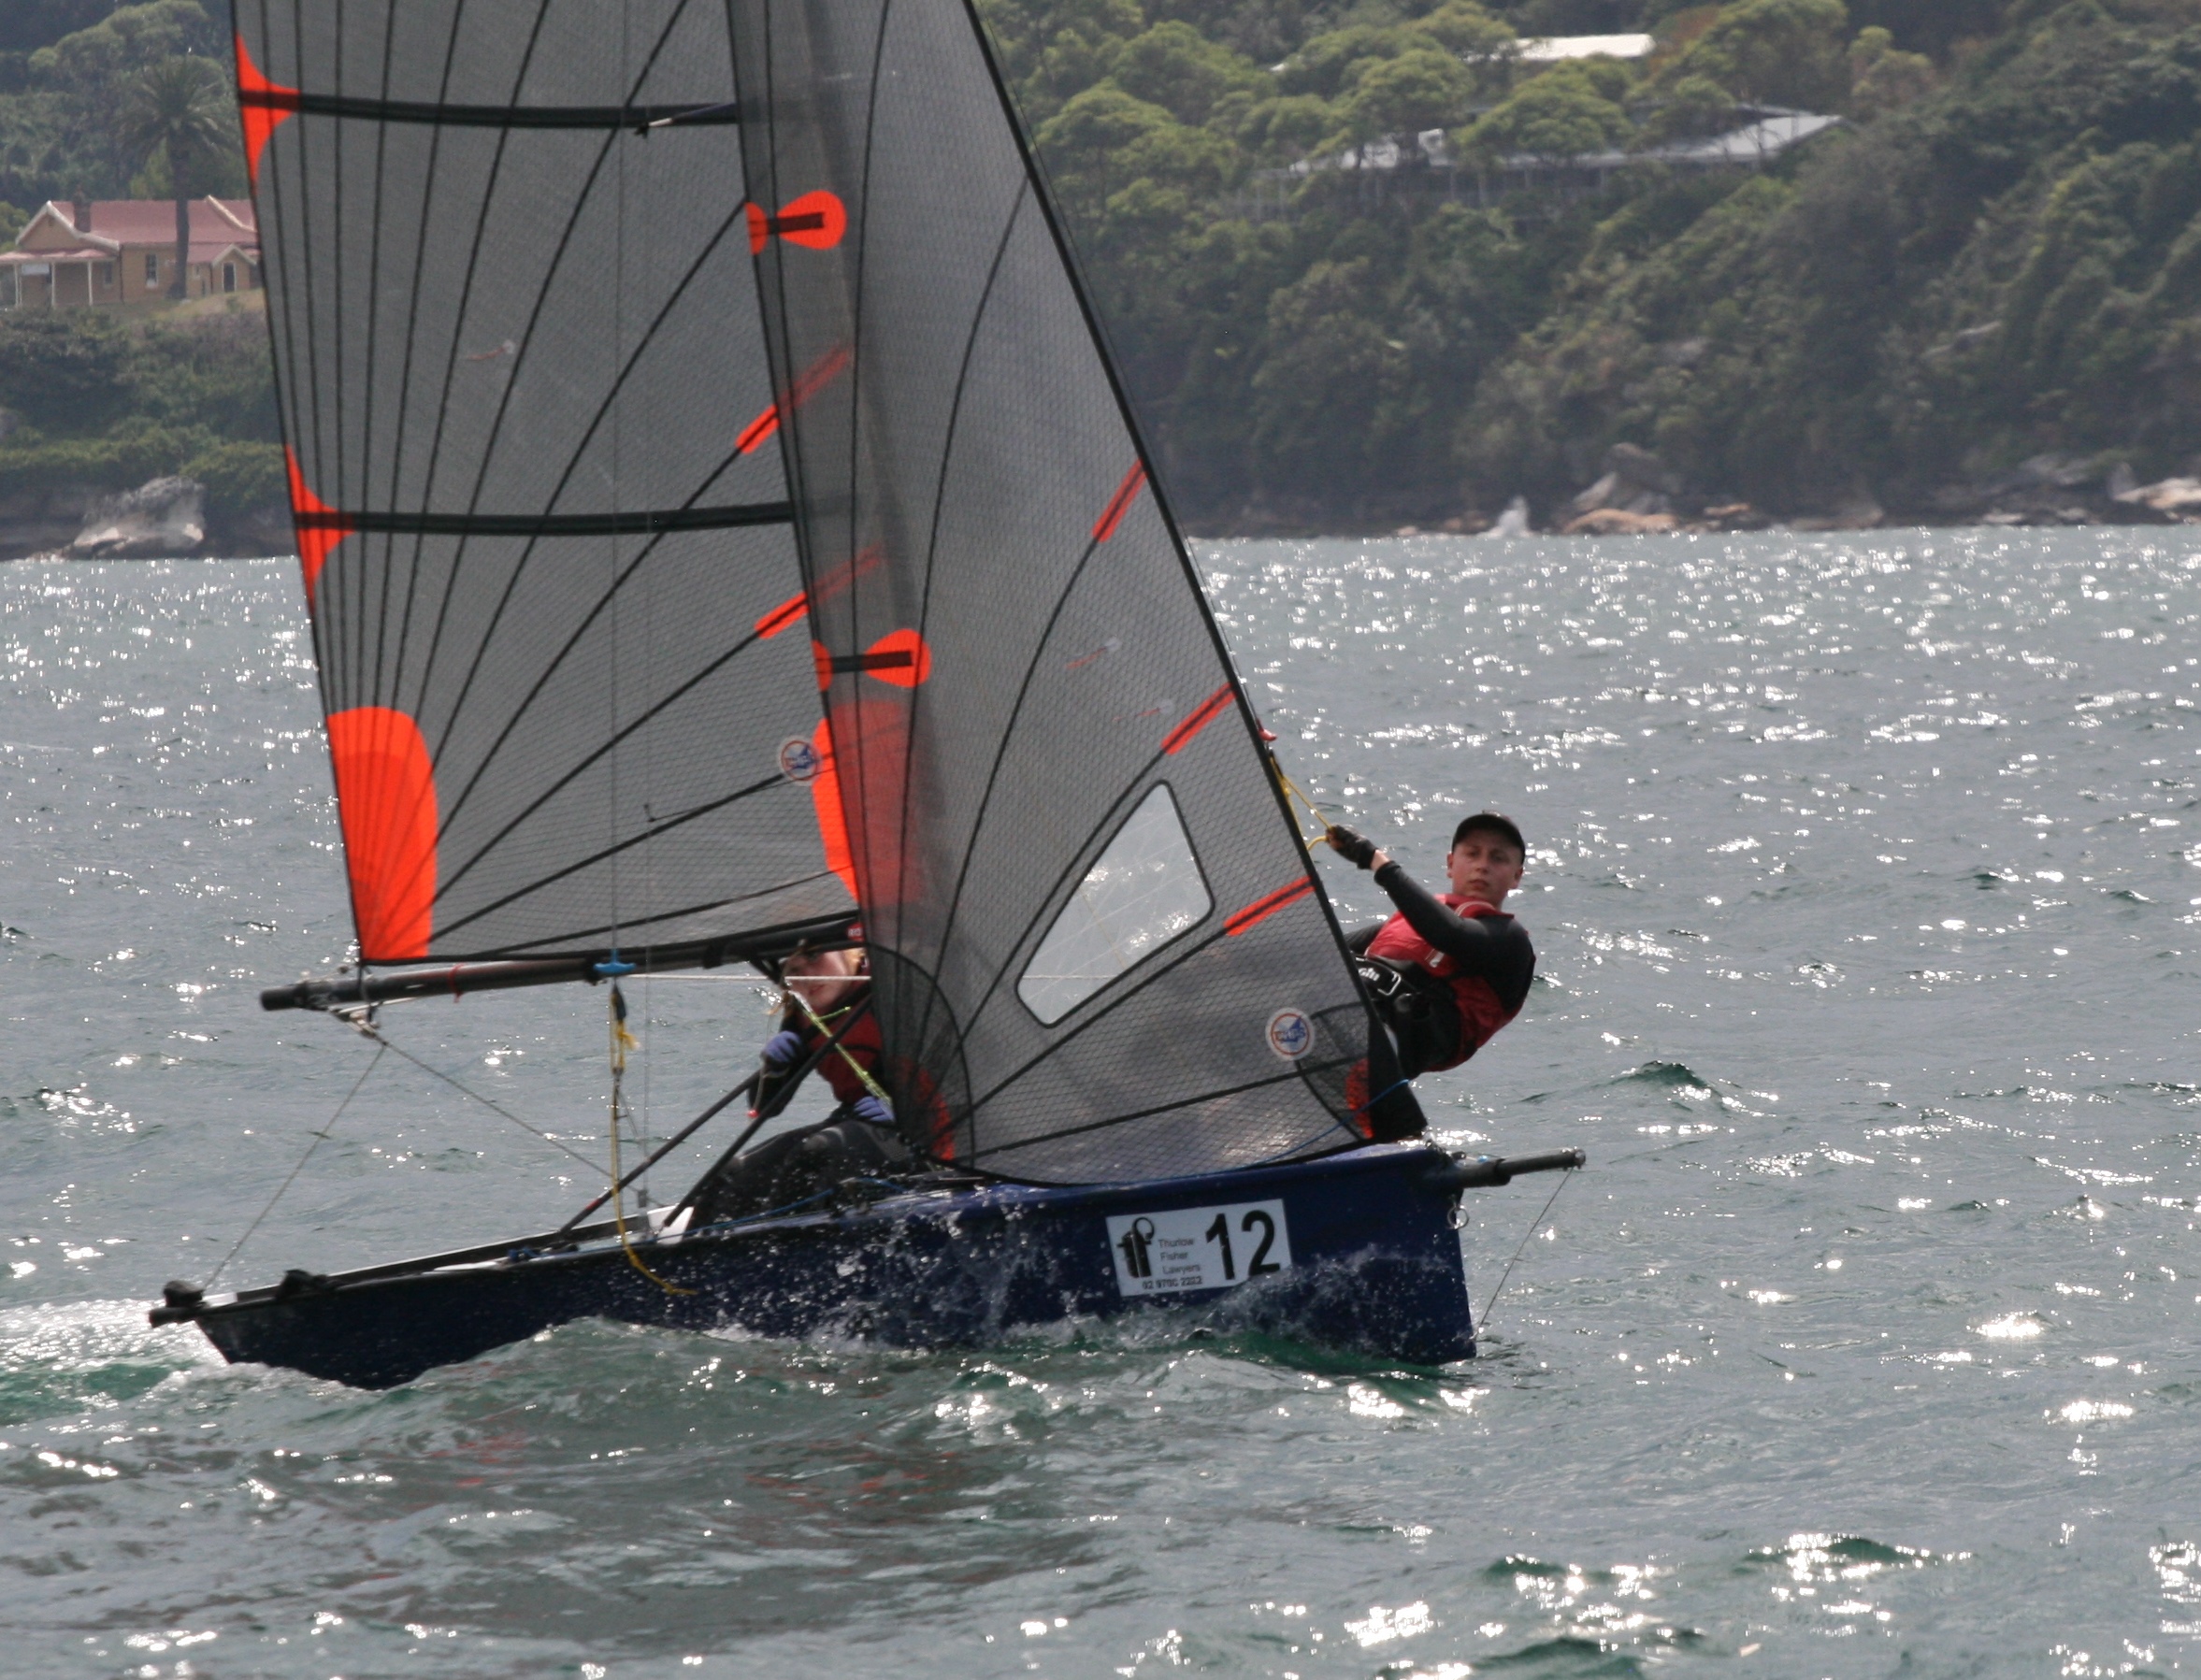 Kiera Vickery and Peter McLeod on their way to a good result in Sunday’s race.